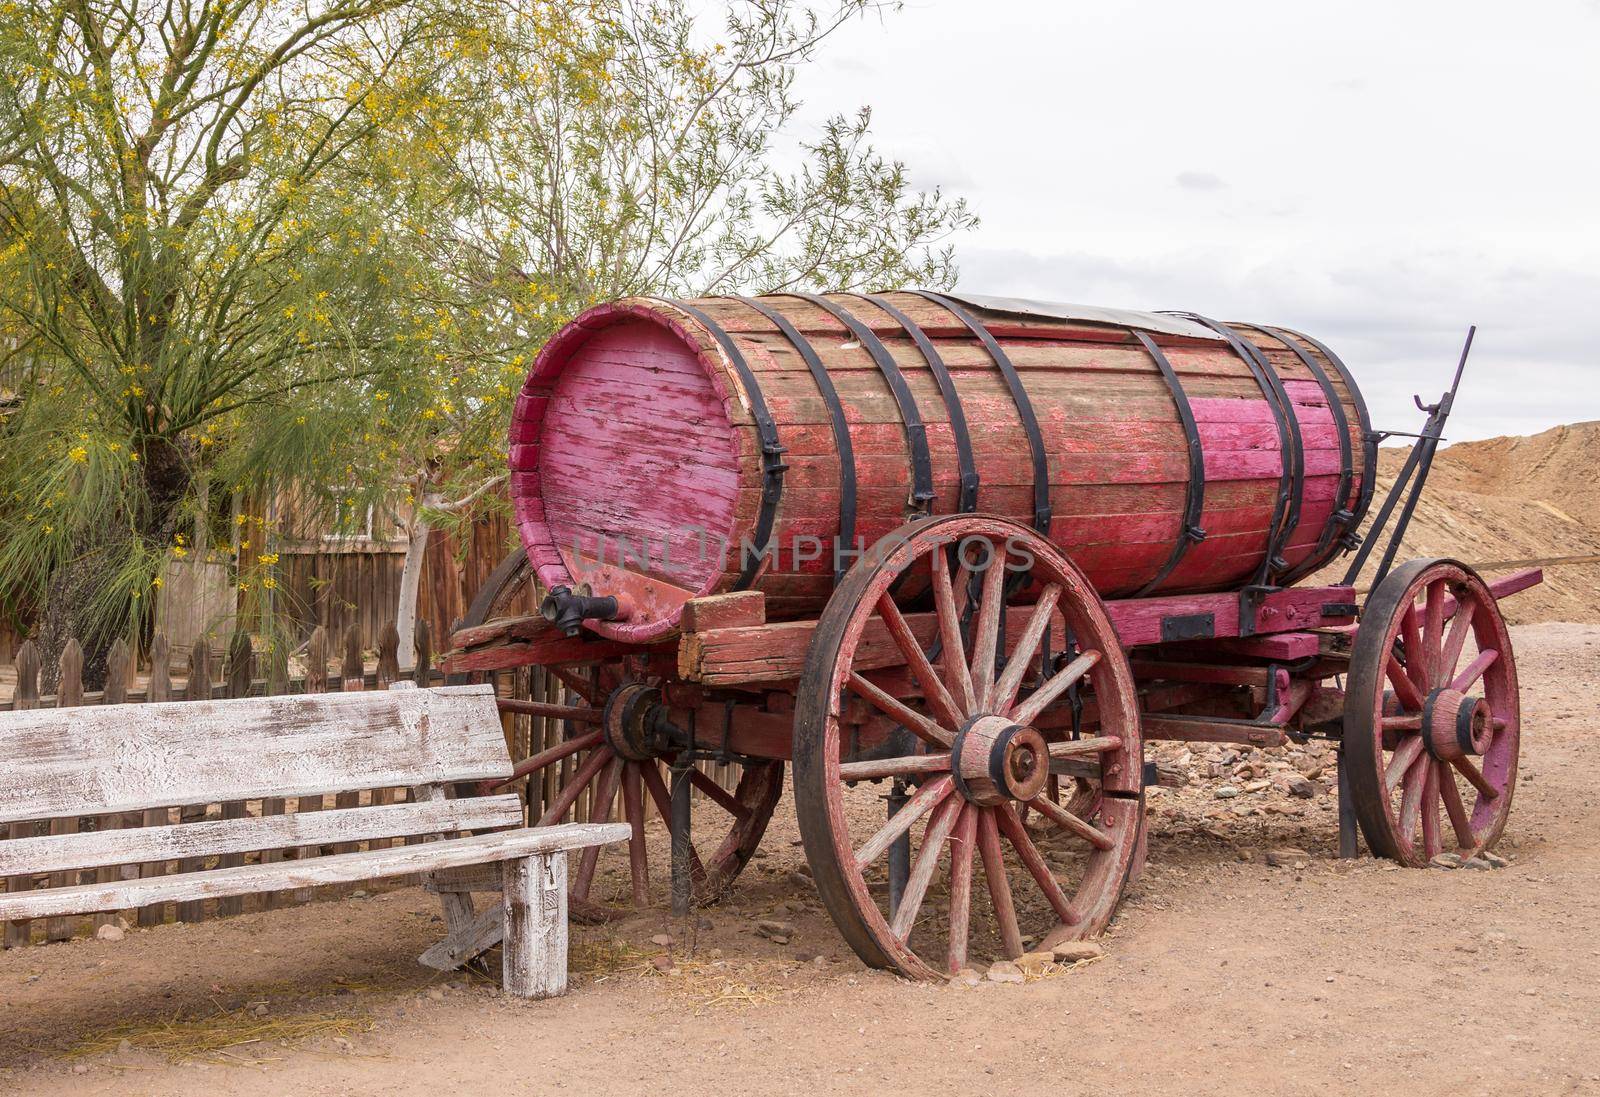 Old wagon for water transportation